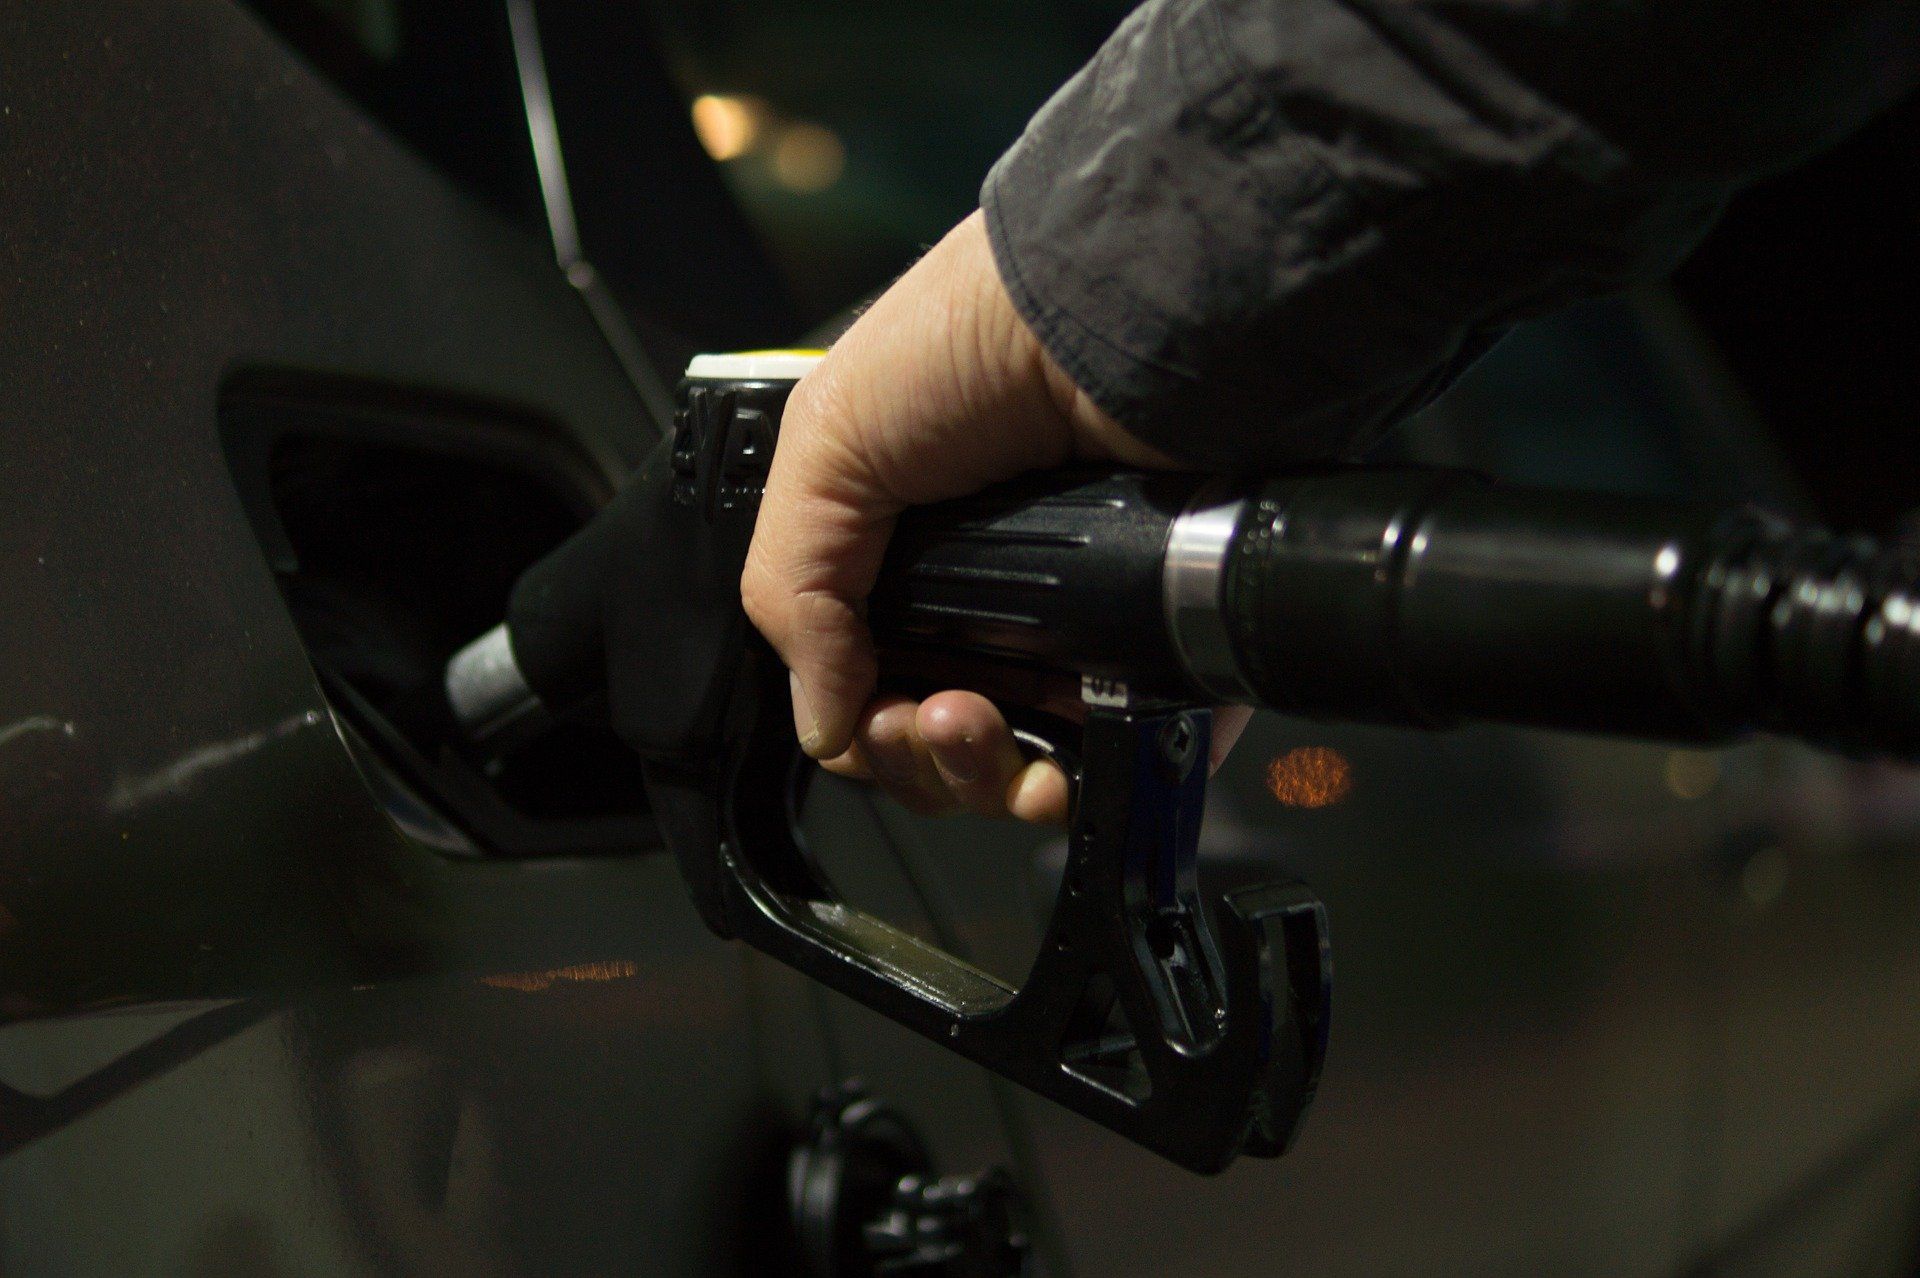 Fuel prices: Petrol priced at Rs 95.41, diesel Rs 86.67 in Delhi on March 2, 2022